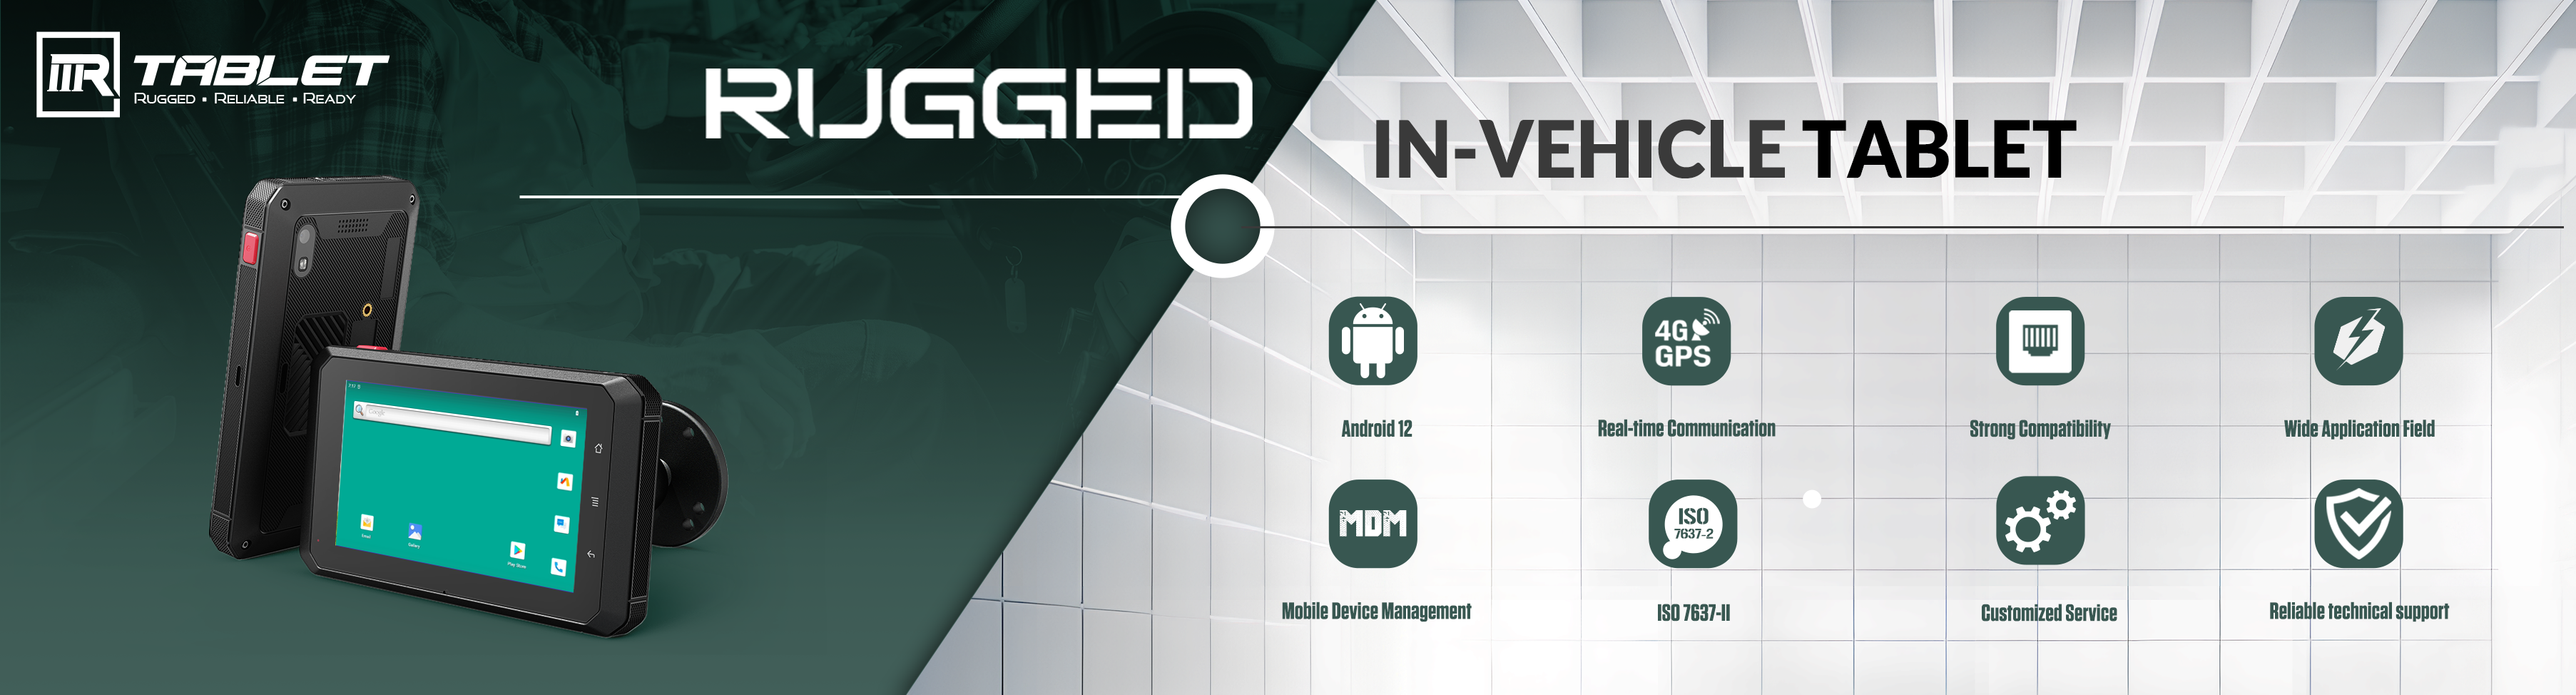 VT-5A: The Ultimate In-vehicle Tablet with Enhanced Connectivity and Performance